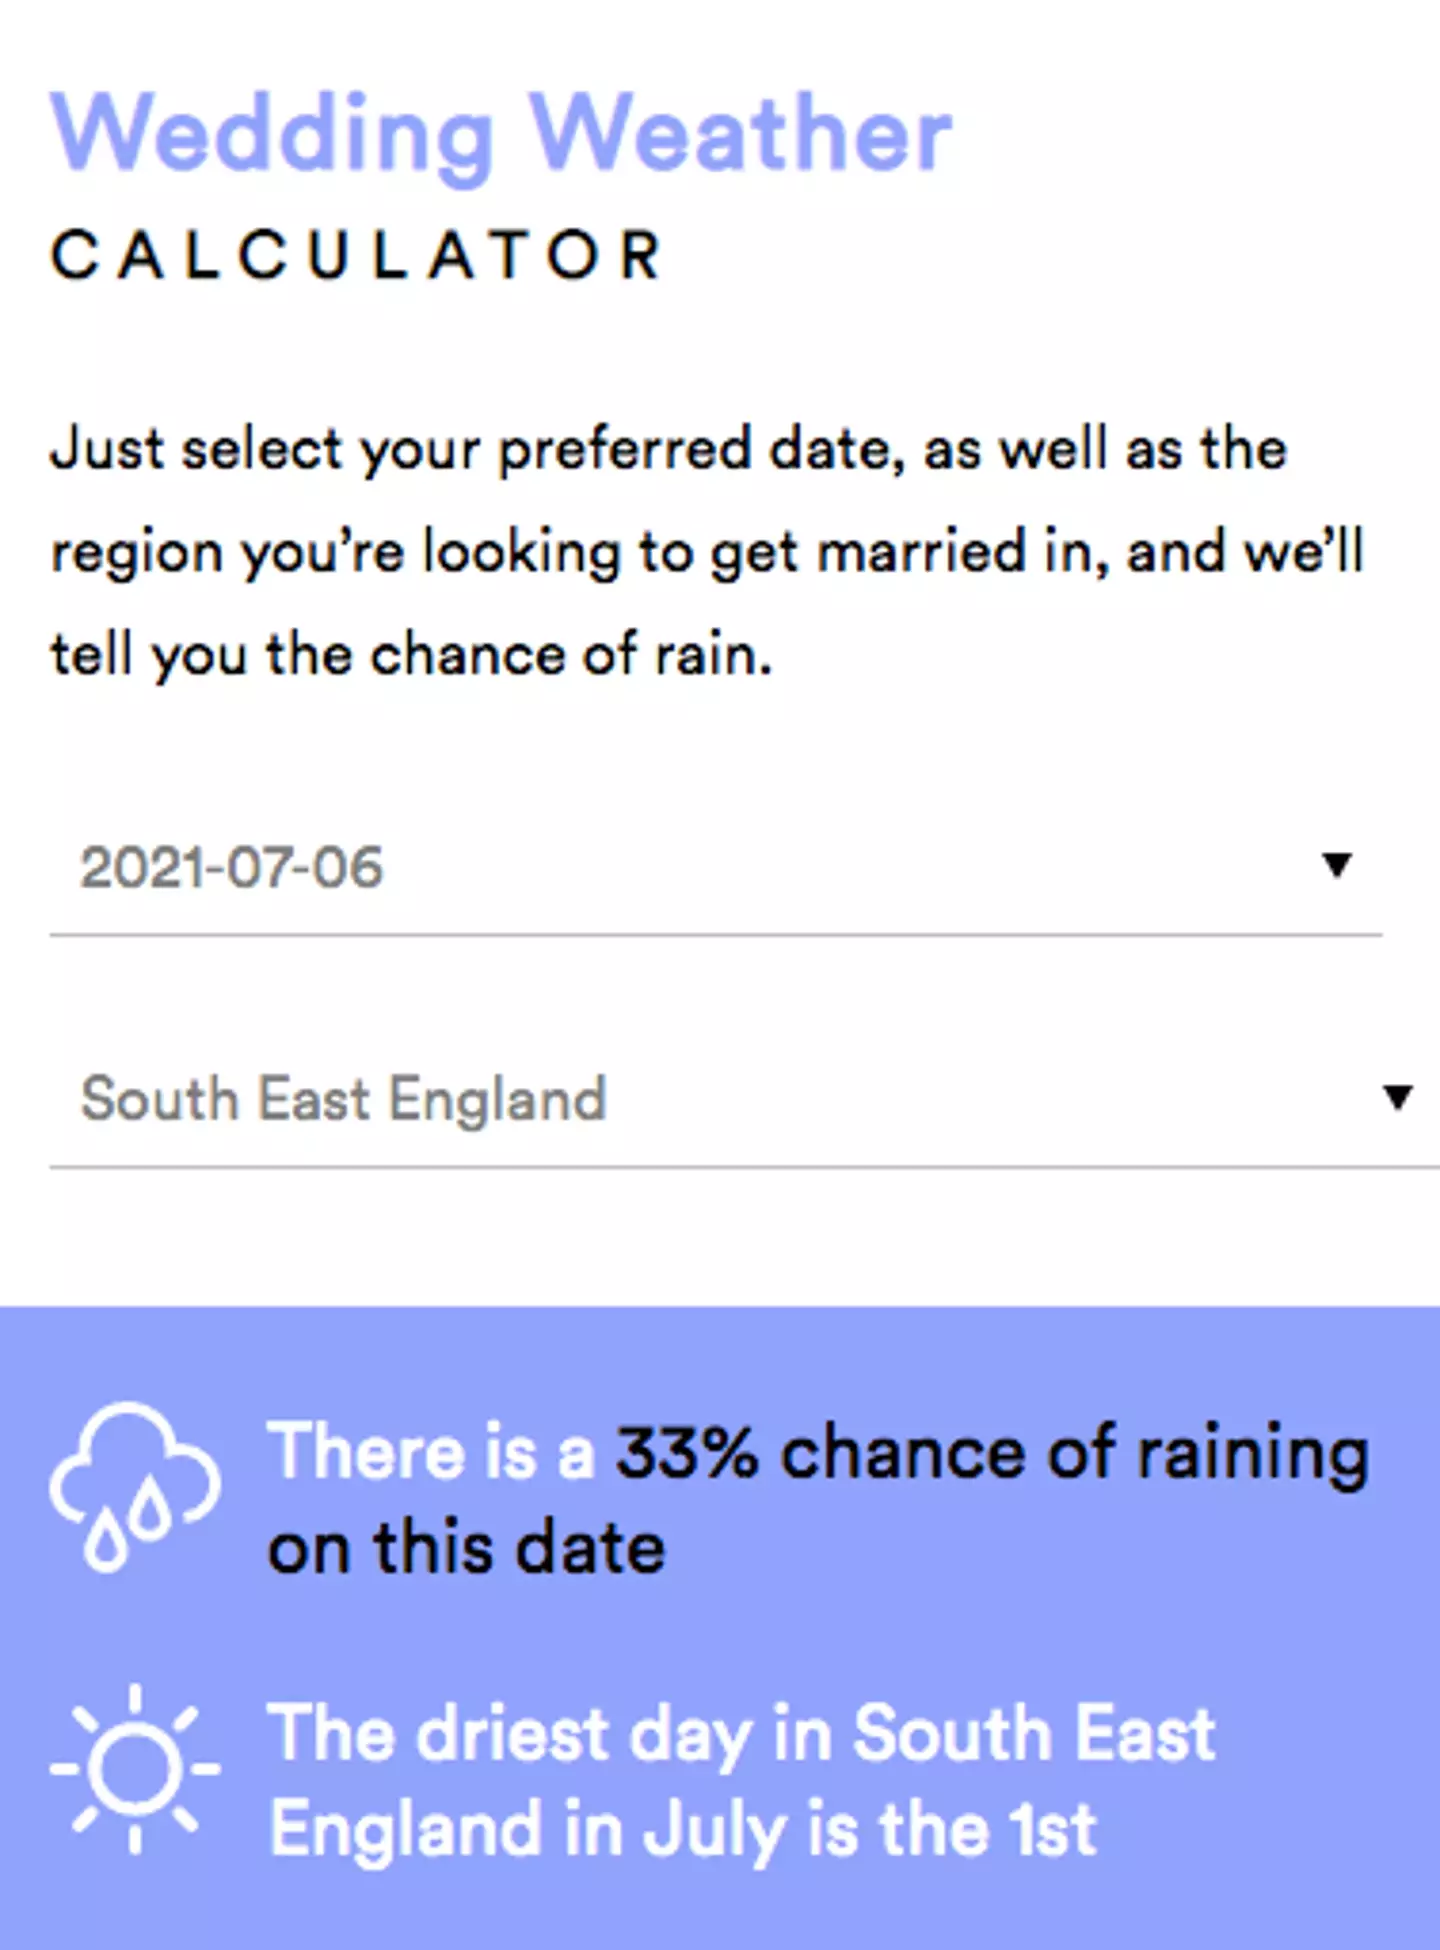 The calculator works out the chance of rain on your favoured day and location (